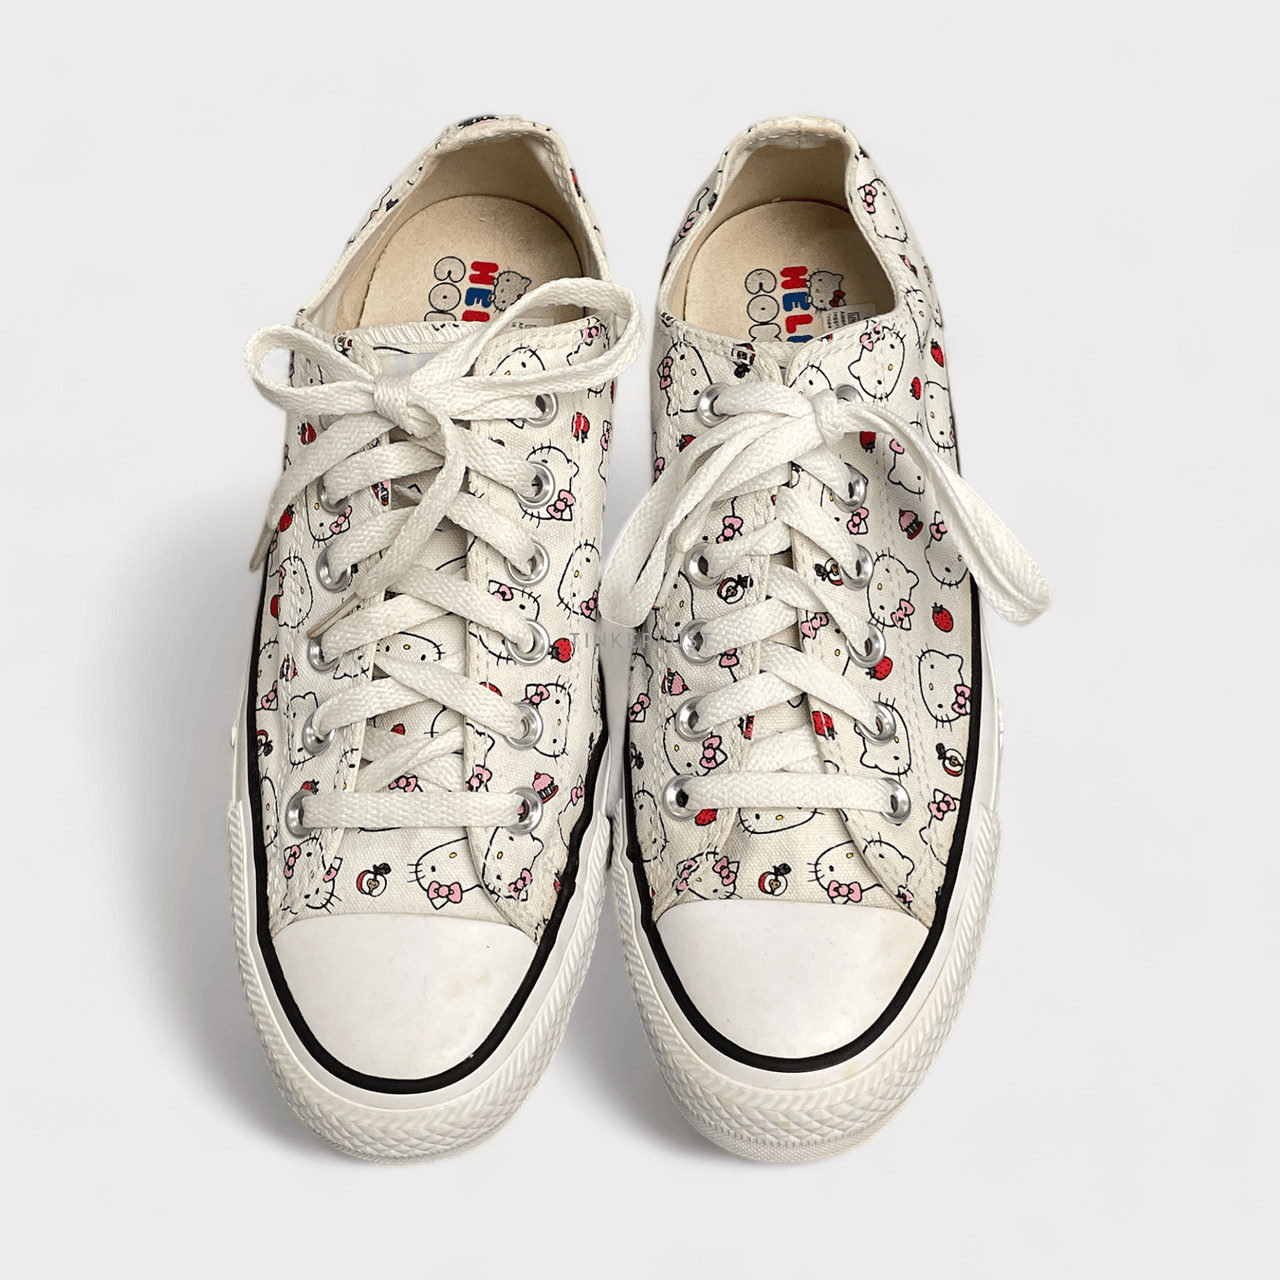 Converse Hello Kitty x Chuck Taylor All Star Low White Sneakers